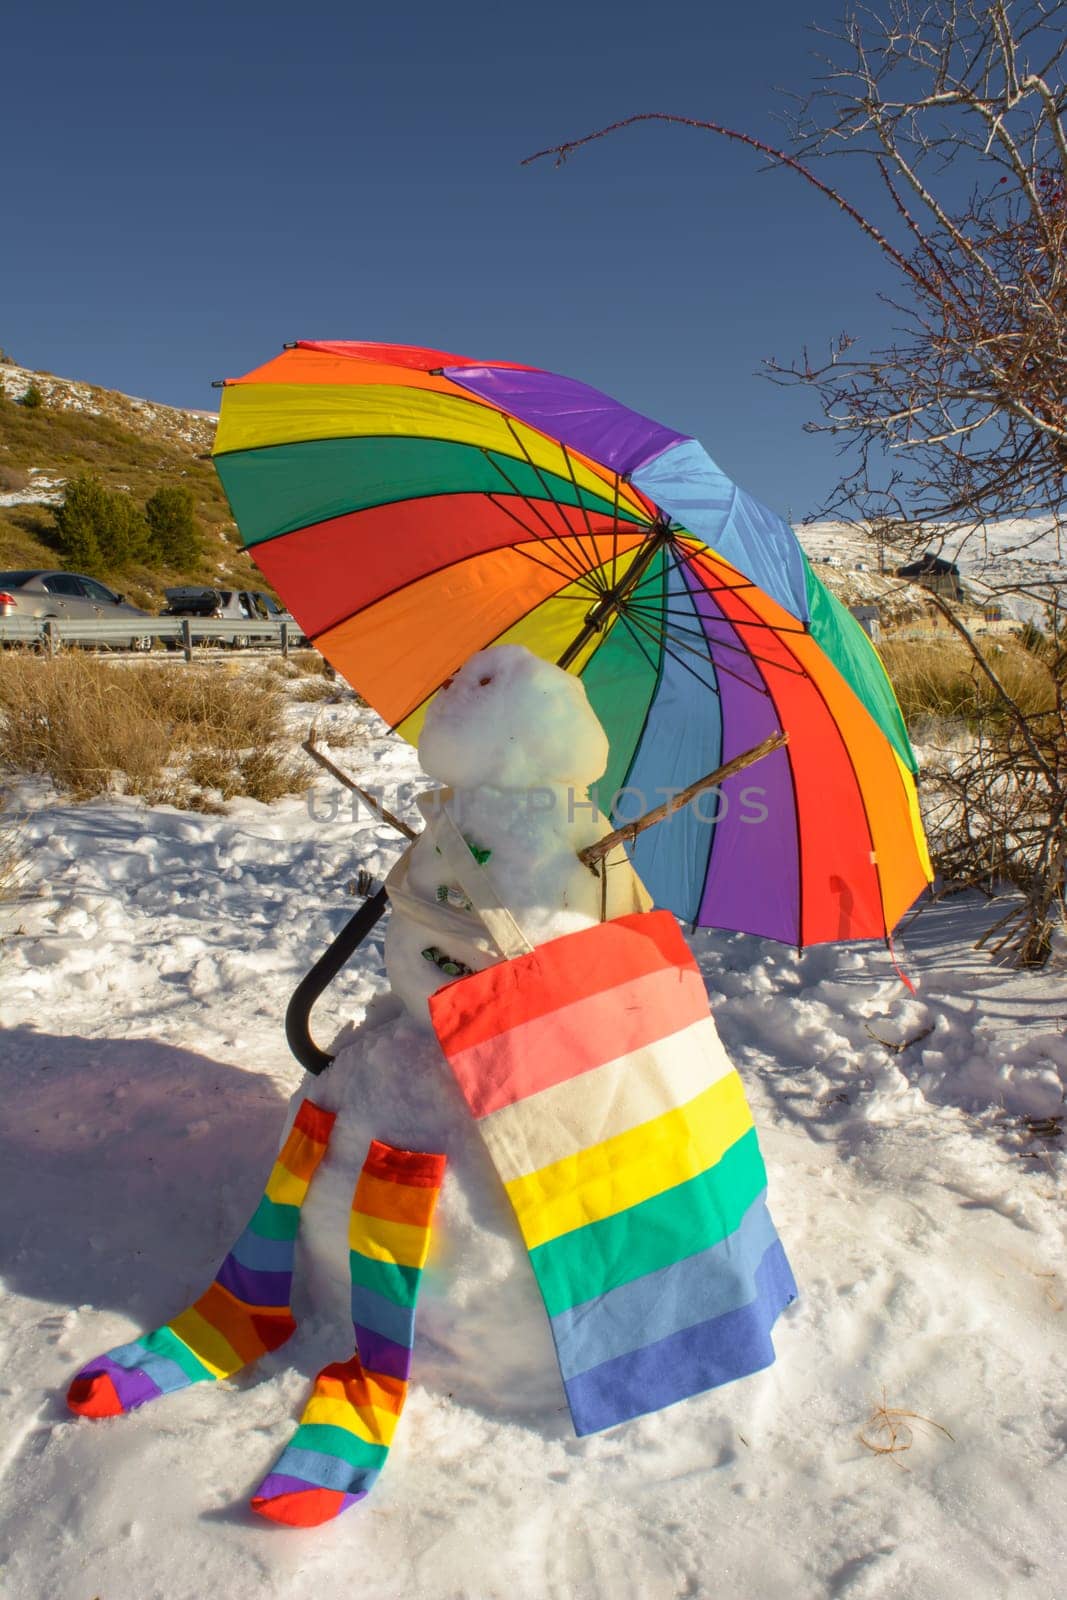 profile view, of snowman with colorful accessories of the lgtb pride, in sierra nevada,granada,andalucia,spain.lgtb community by carlosviv